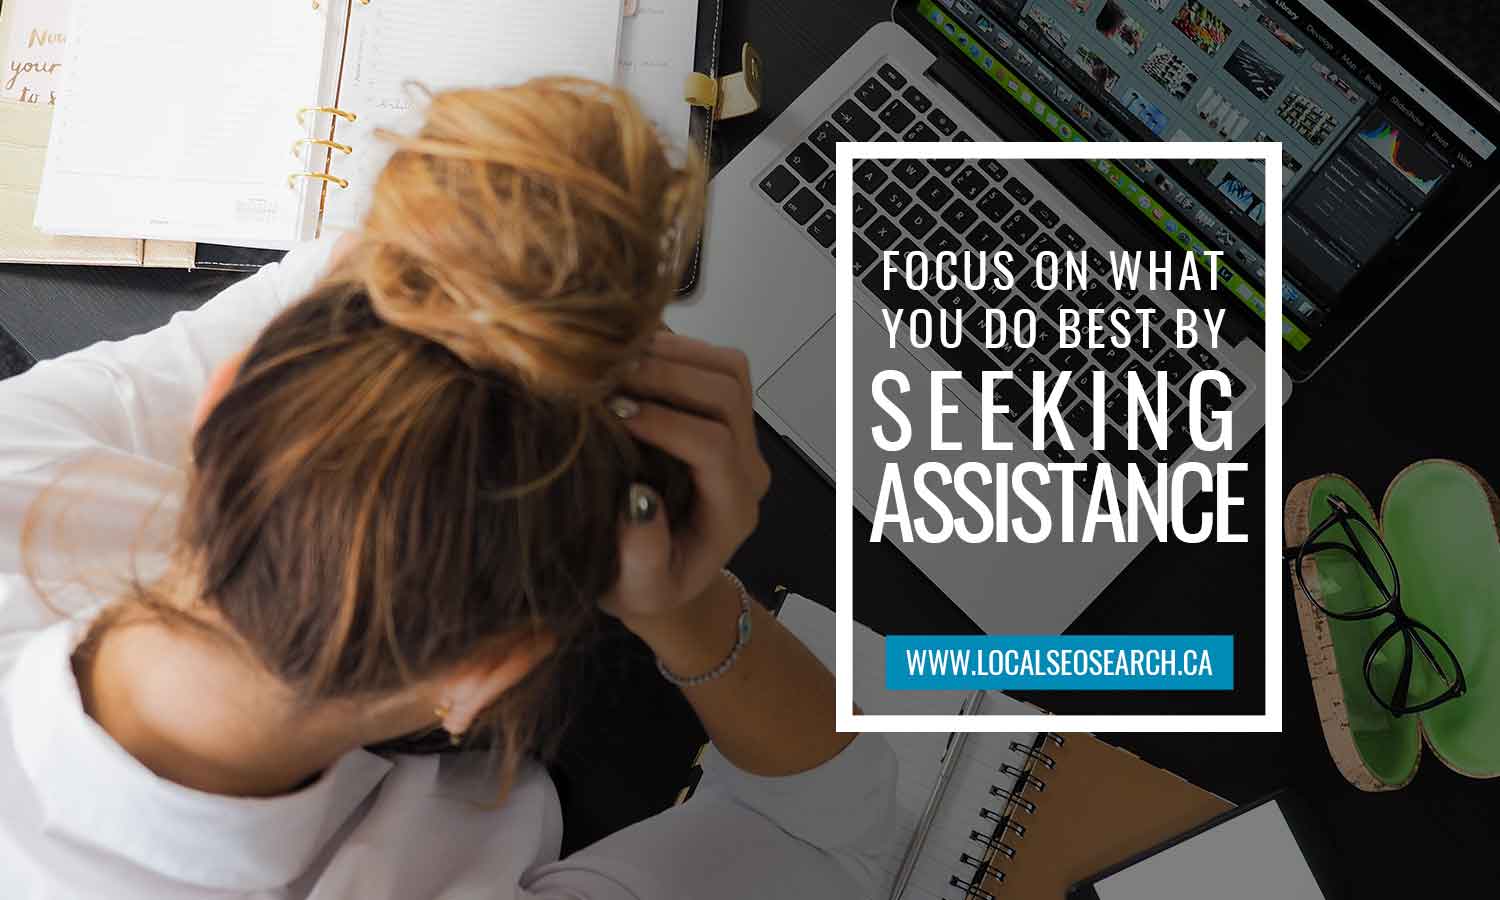 Focus-on-what-you-do-best-by-seeking-assistance